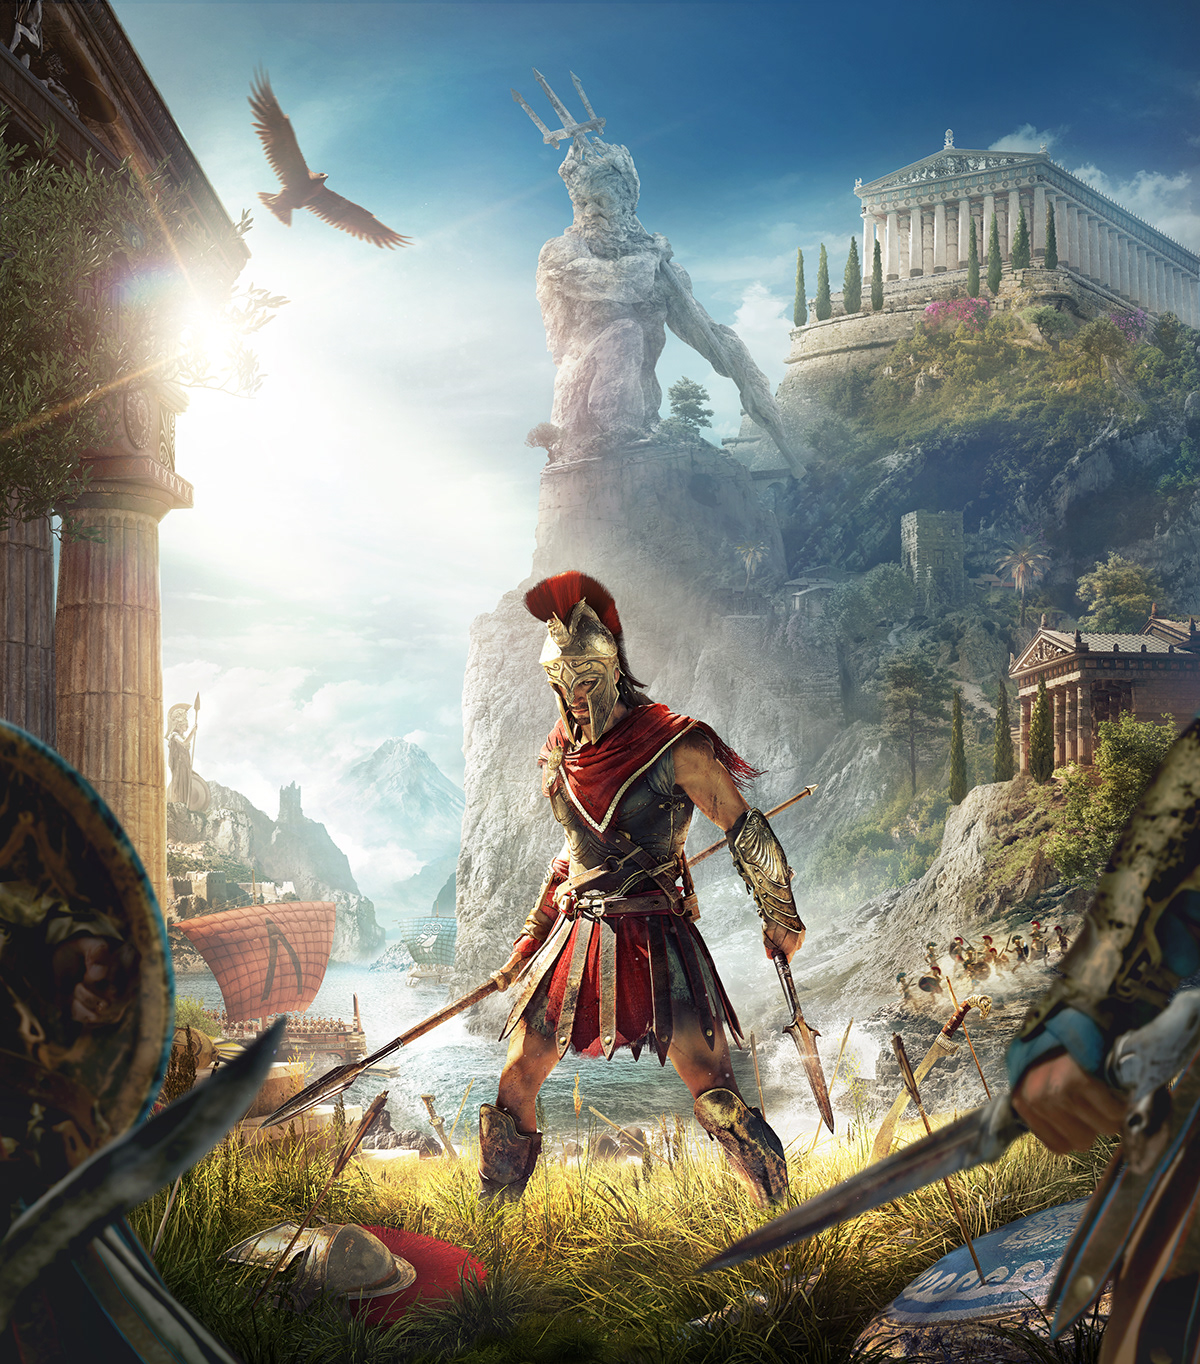 Assassin's Creed Odyssey on Behance